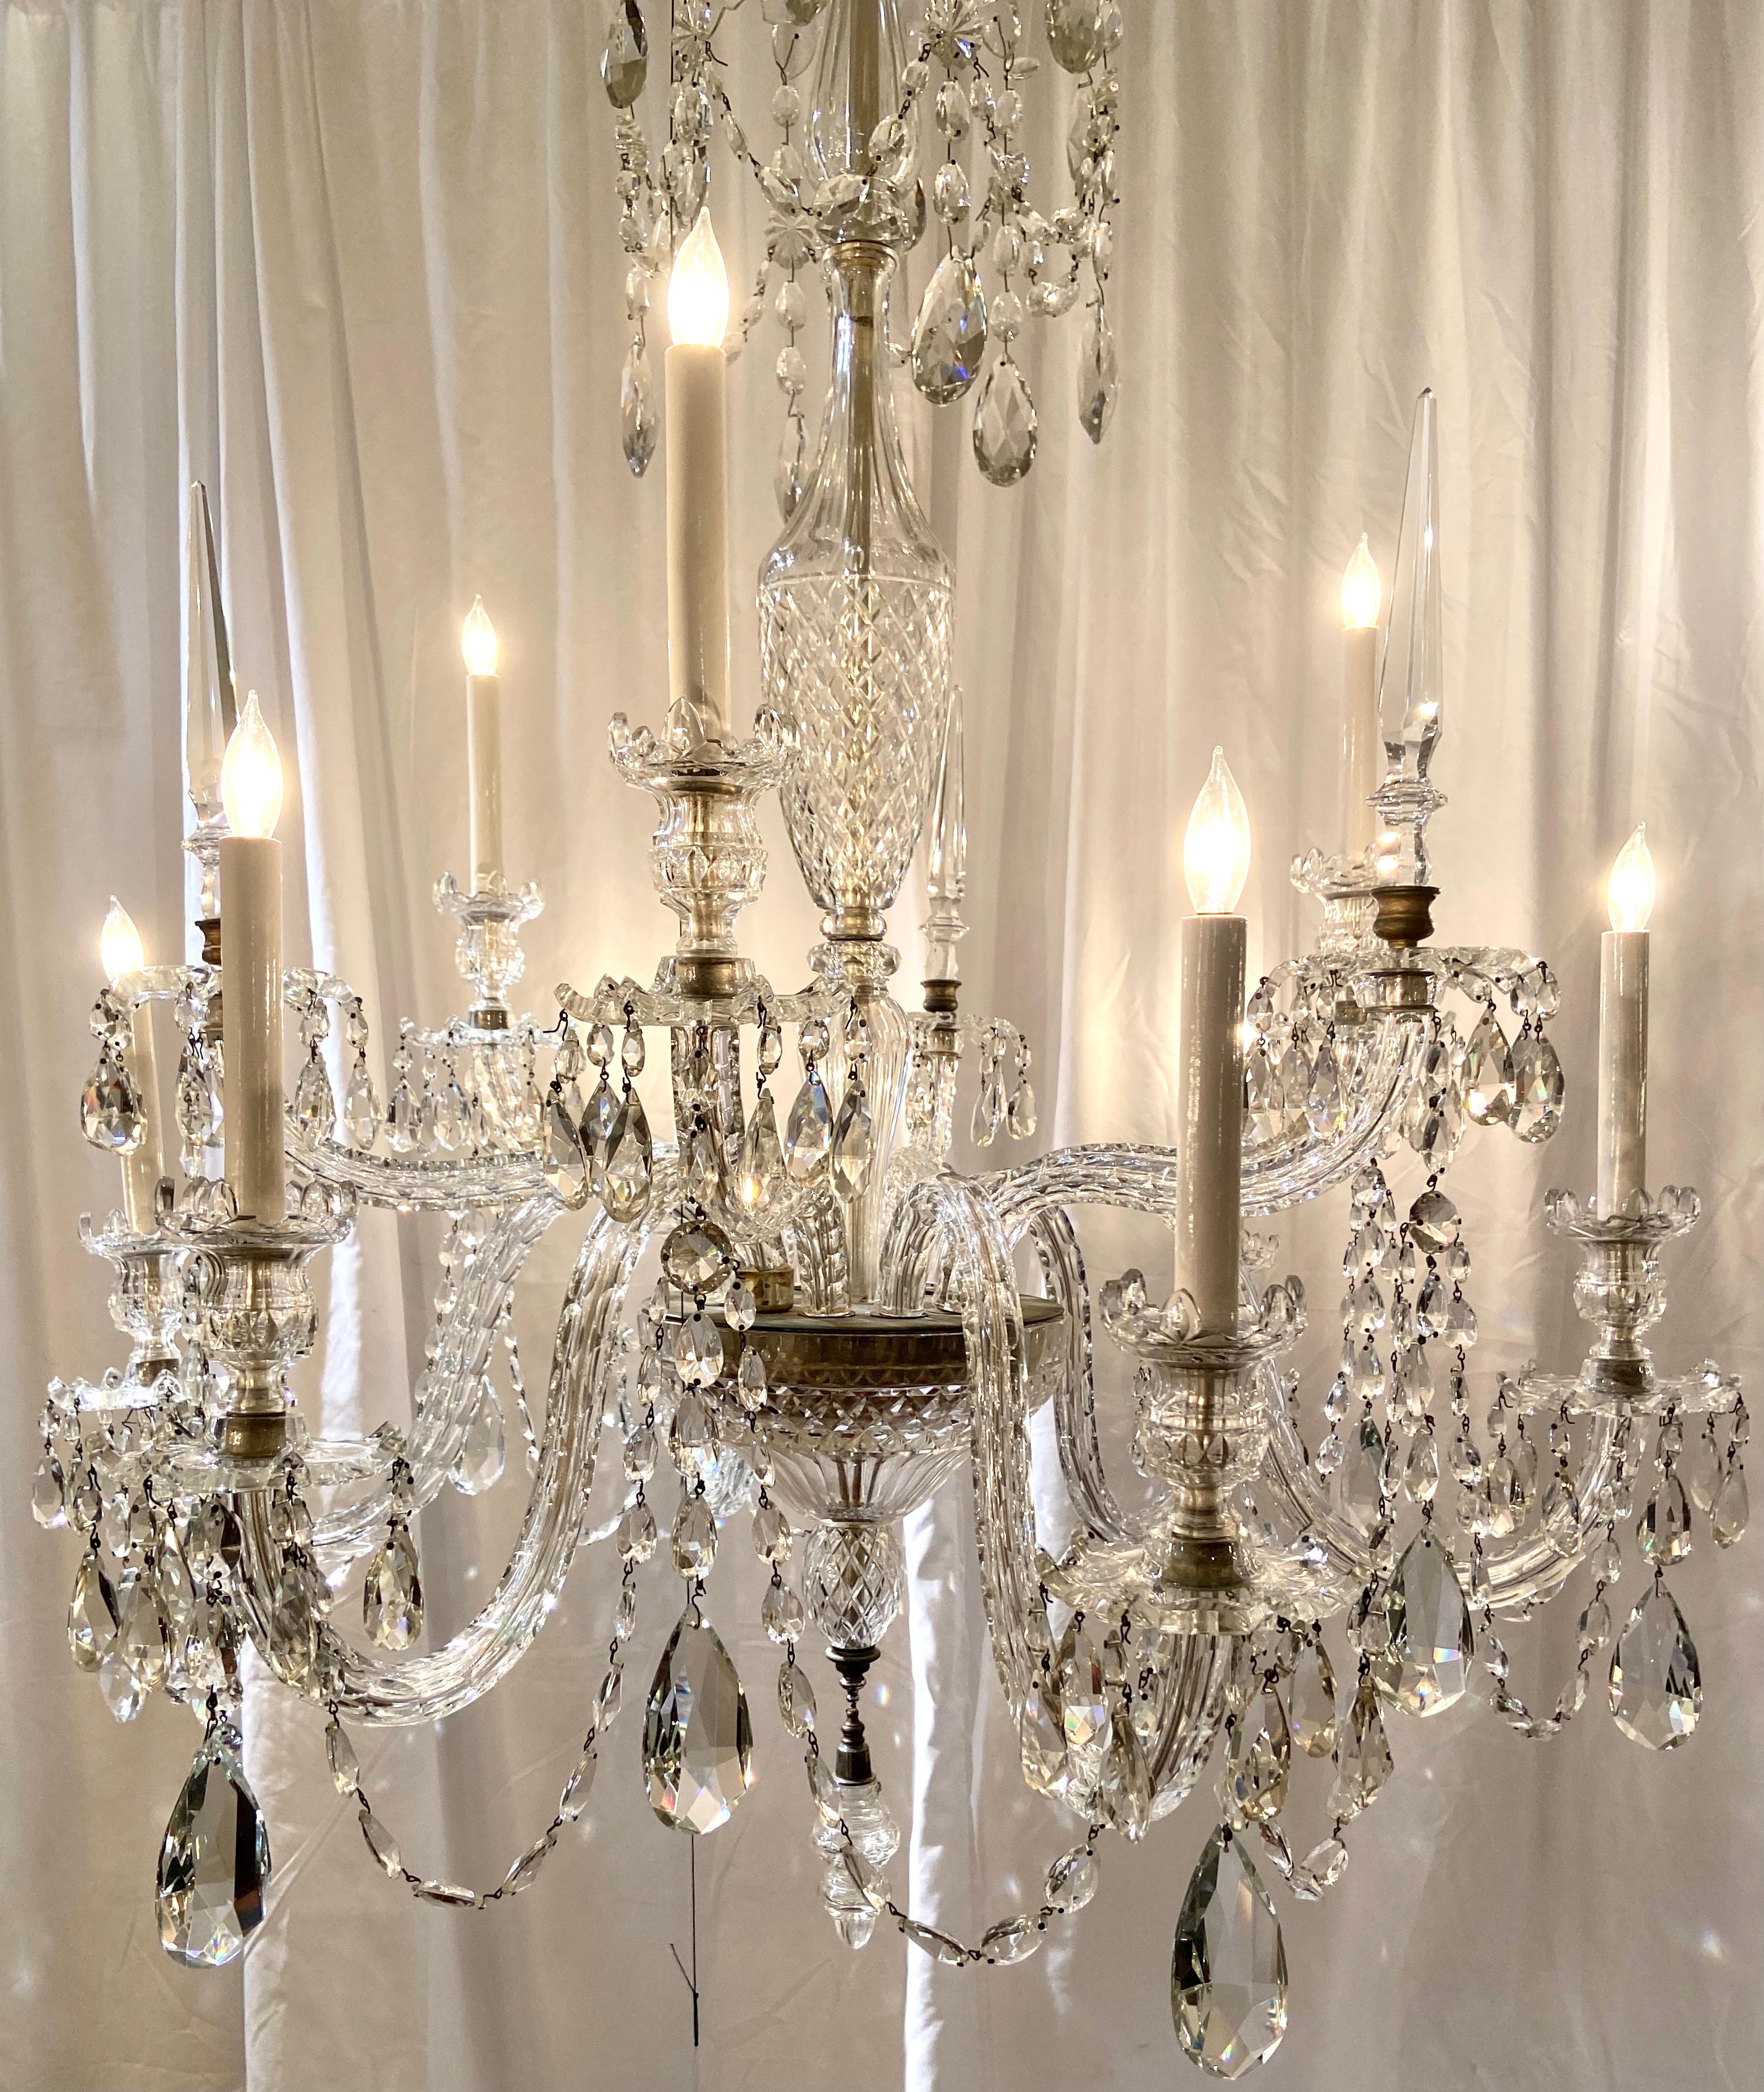 Finest antique turn of the century Irish lead crystal two-tier 9-light chandelier, Circa 1890-1910.